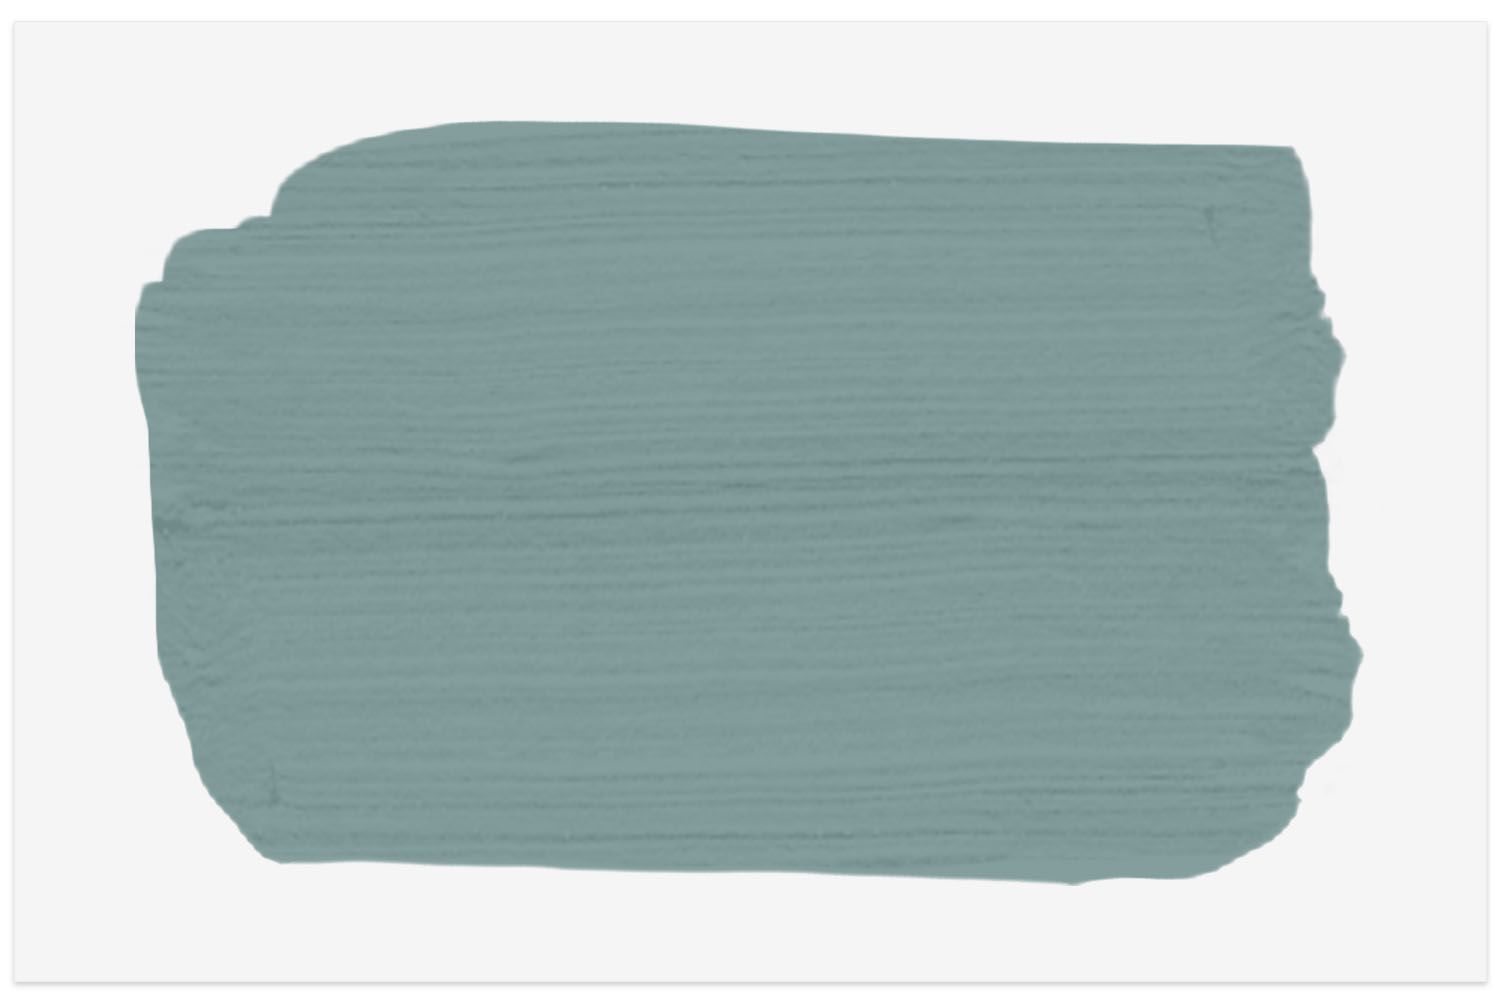 Spruce Paint swatch color in Antique Teal